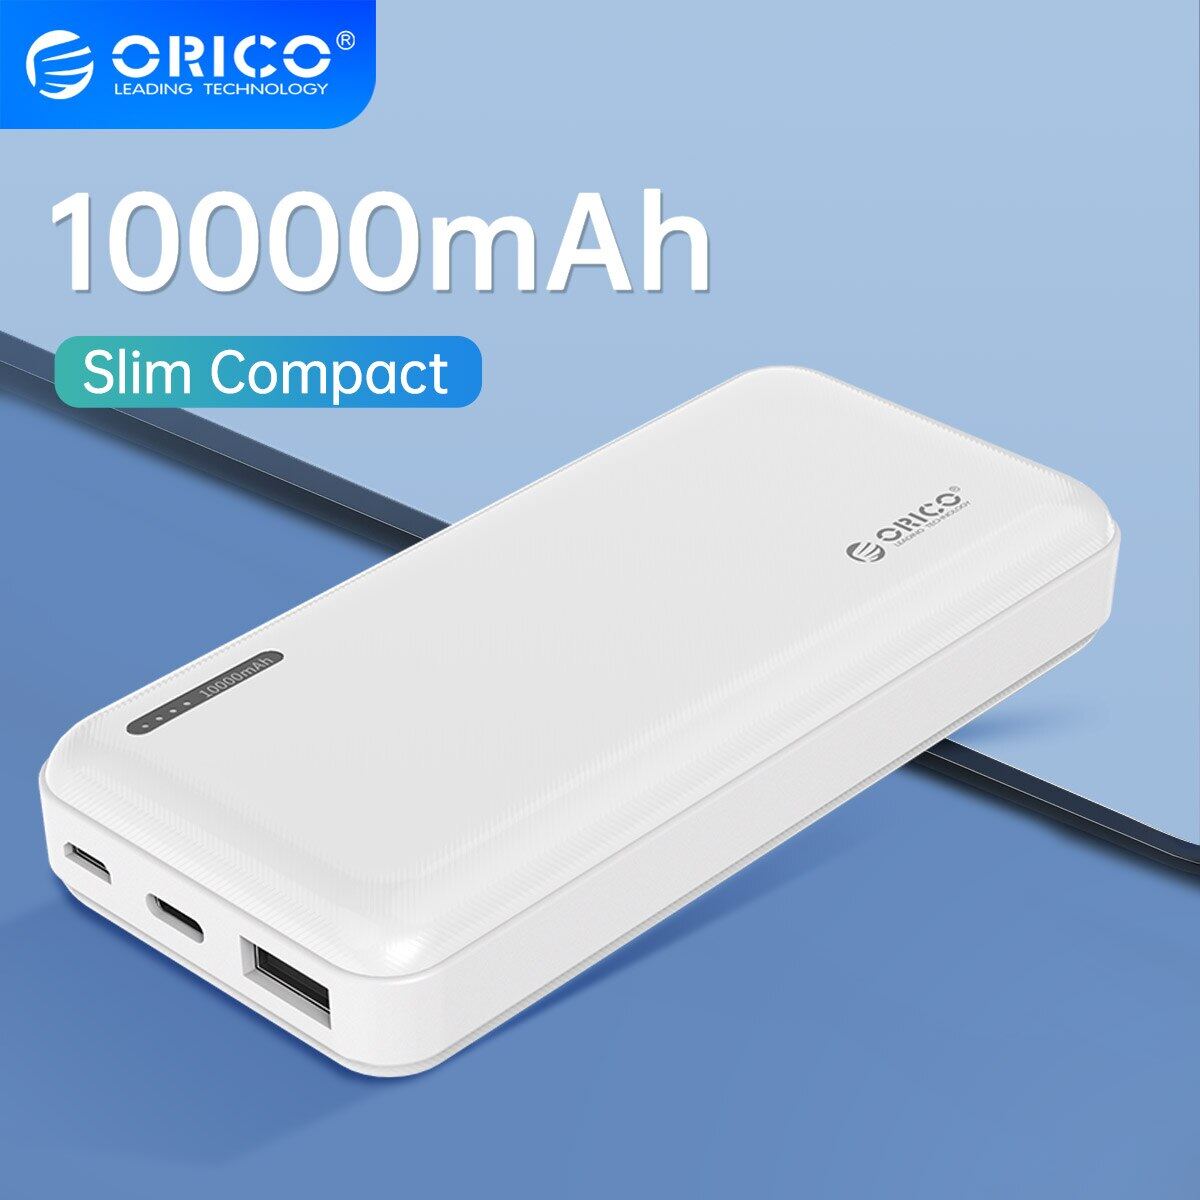 ORICO Slim Compact Power Bank for iphone Portable External Battery for